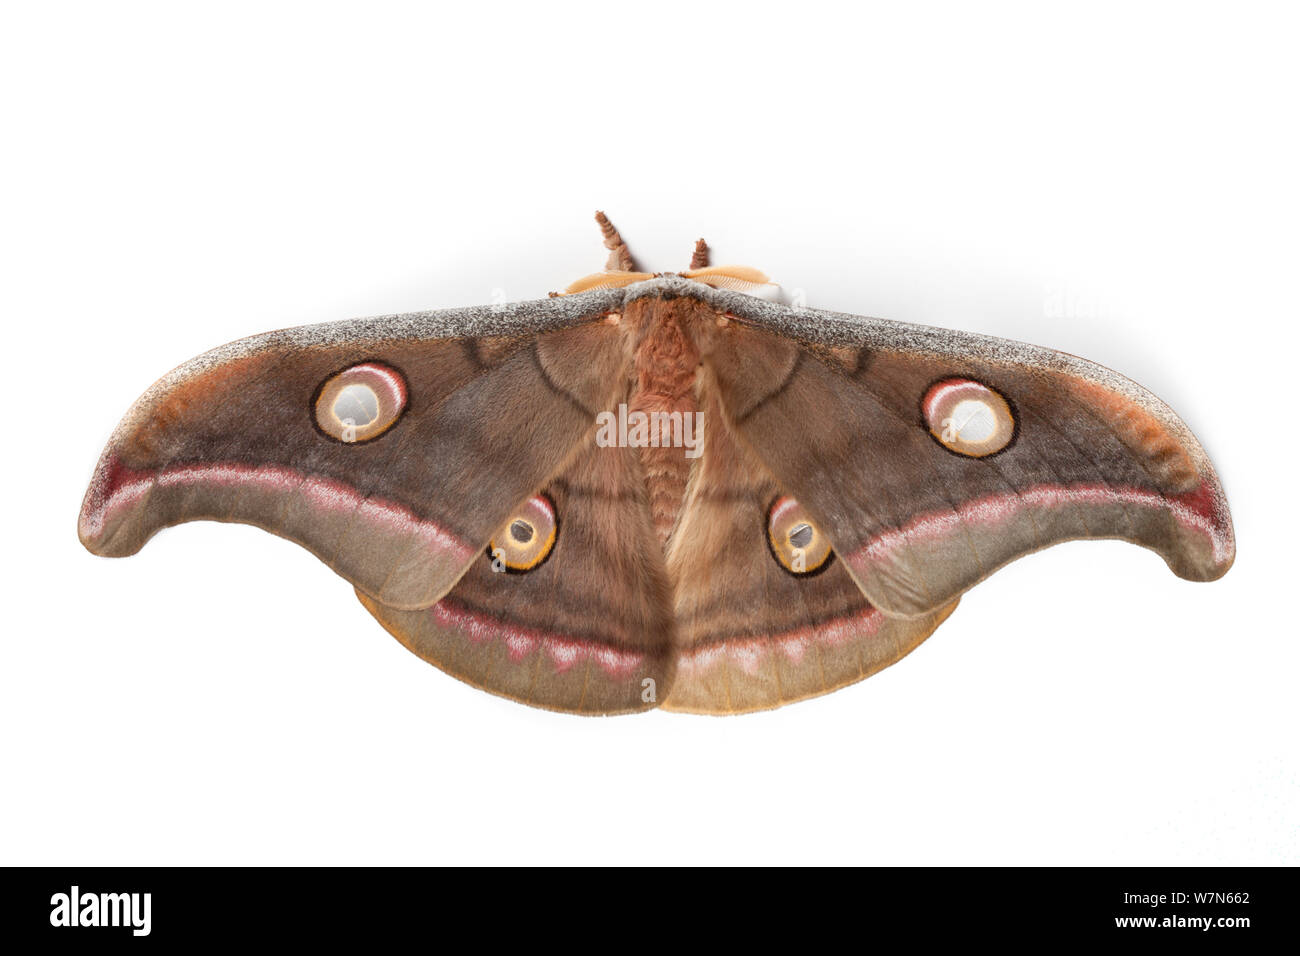 Tasar Silkmoth (Antheraea mylitta) male, photographed on a white background. Captive, originating from India. Stock Photo